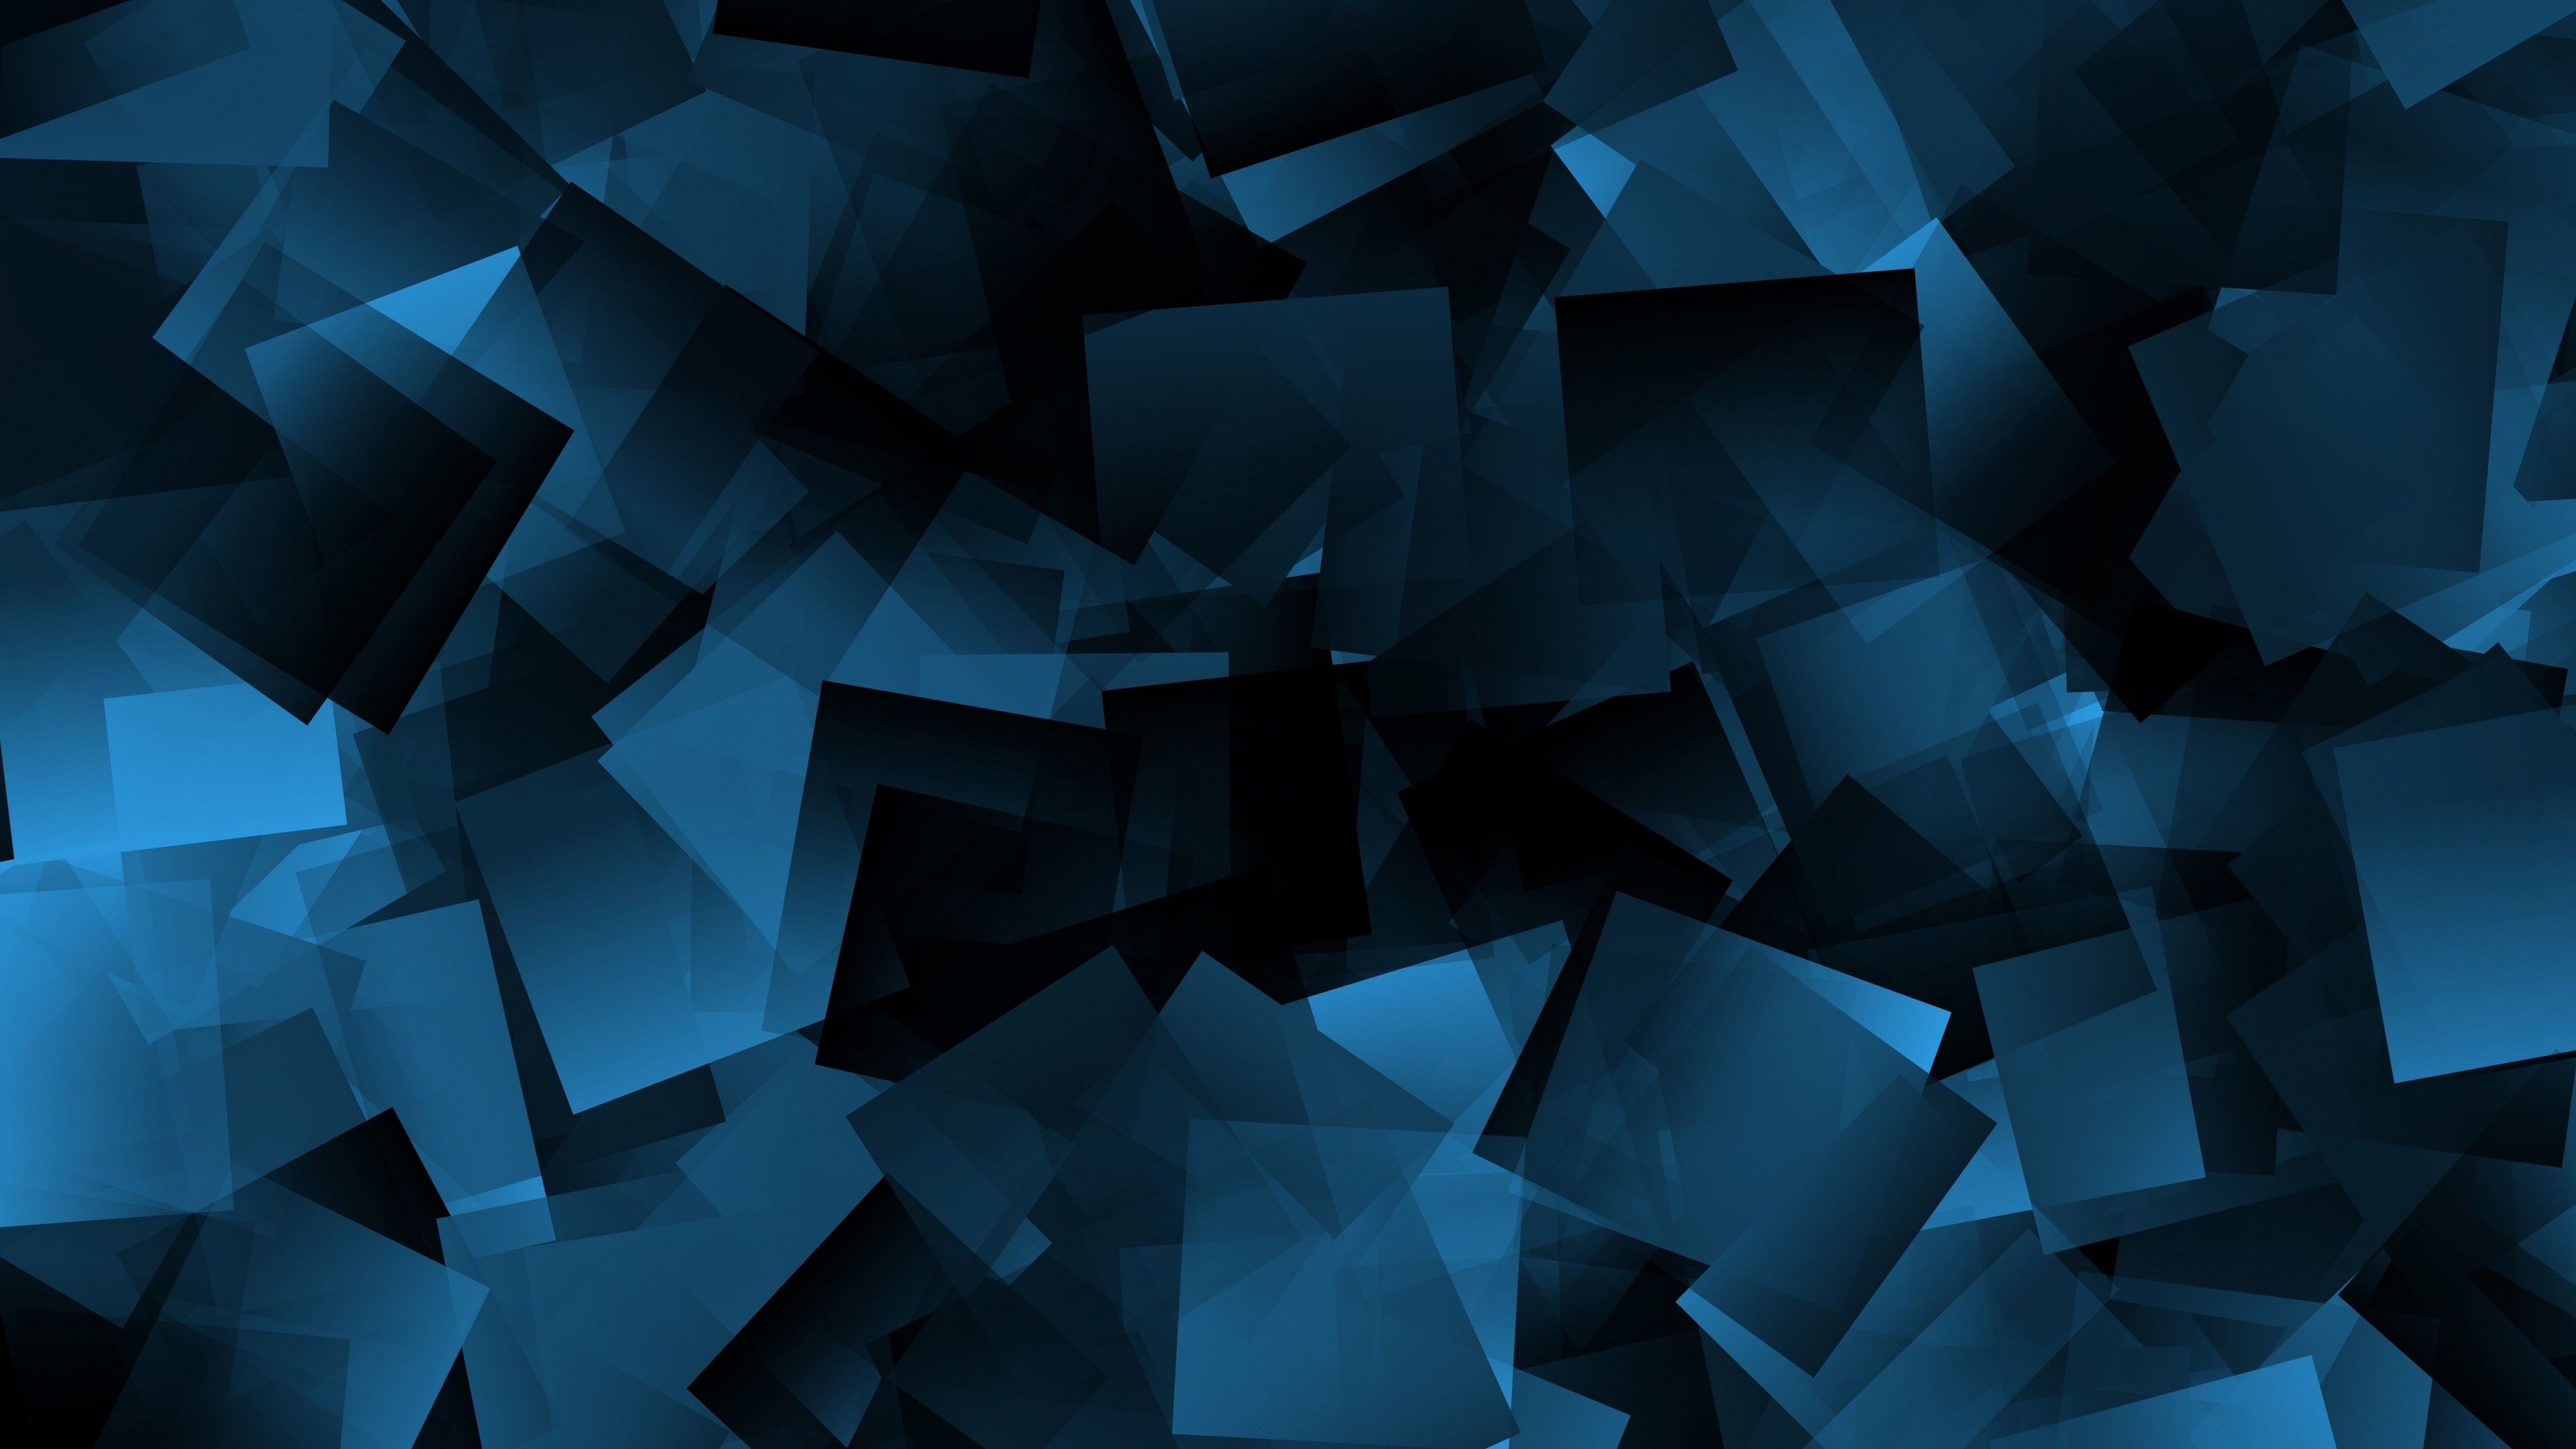 Wallpaper Shapes, Squares, Blue, 4K, Abstract,. Wallpaper for iPhone, Android, Mobile and Desktop